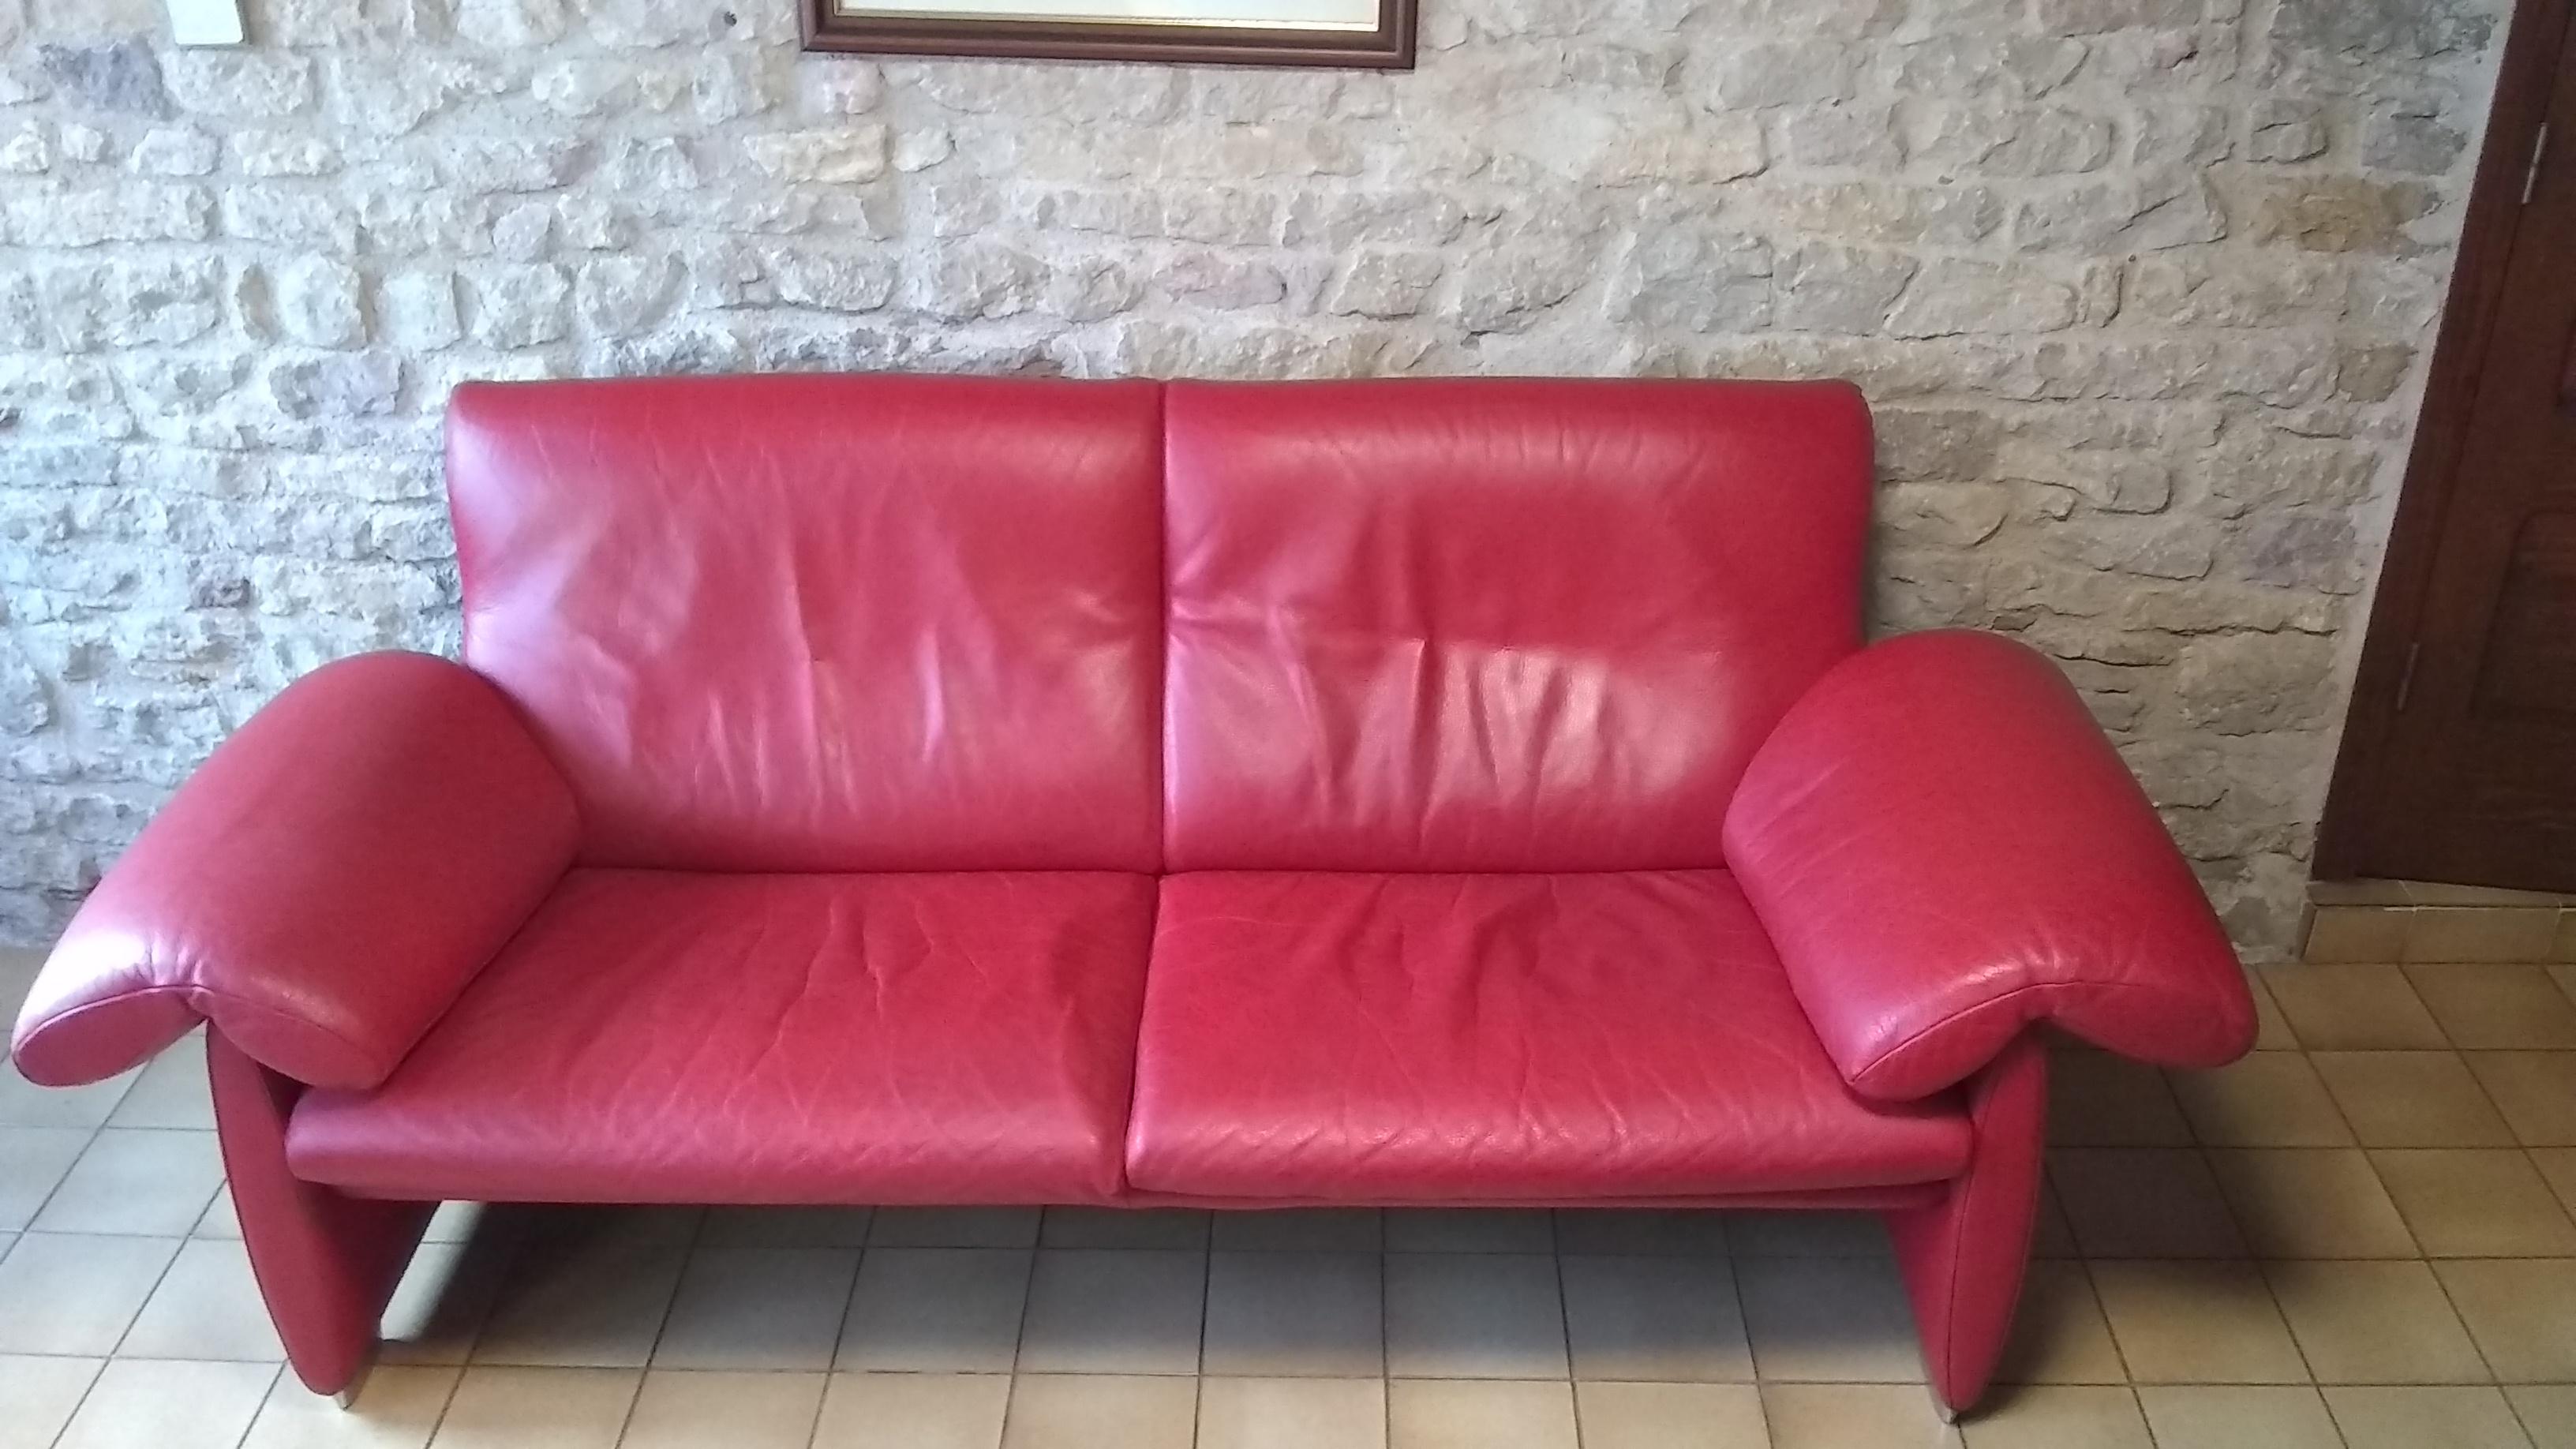 Beautiful leather sofa De Sede DS10/02
Black leather
Excellent condition
circa 2000
Measures: 207cm x 85cm x 83cm high approx.
Seat height 42cm approx.
1200 Euros (value 5500).
  